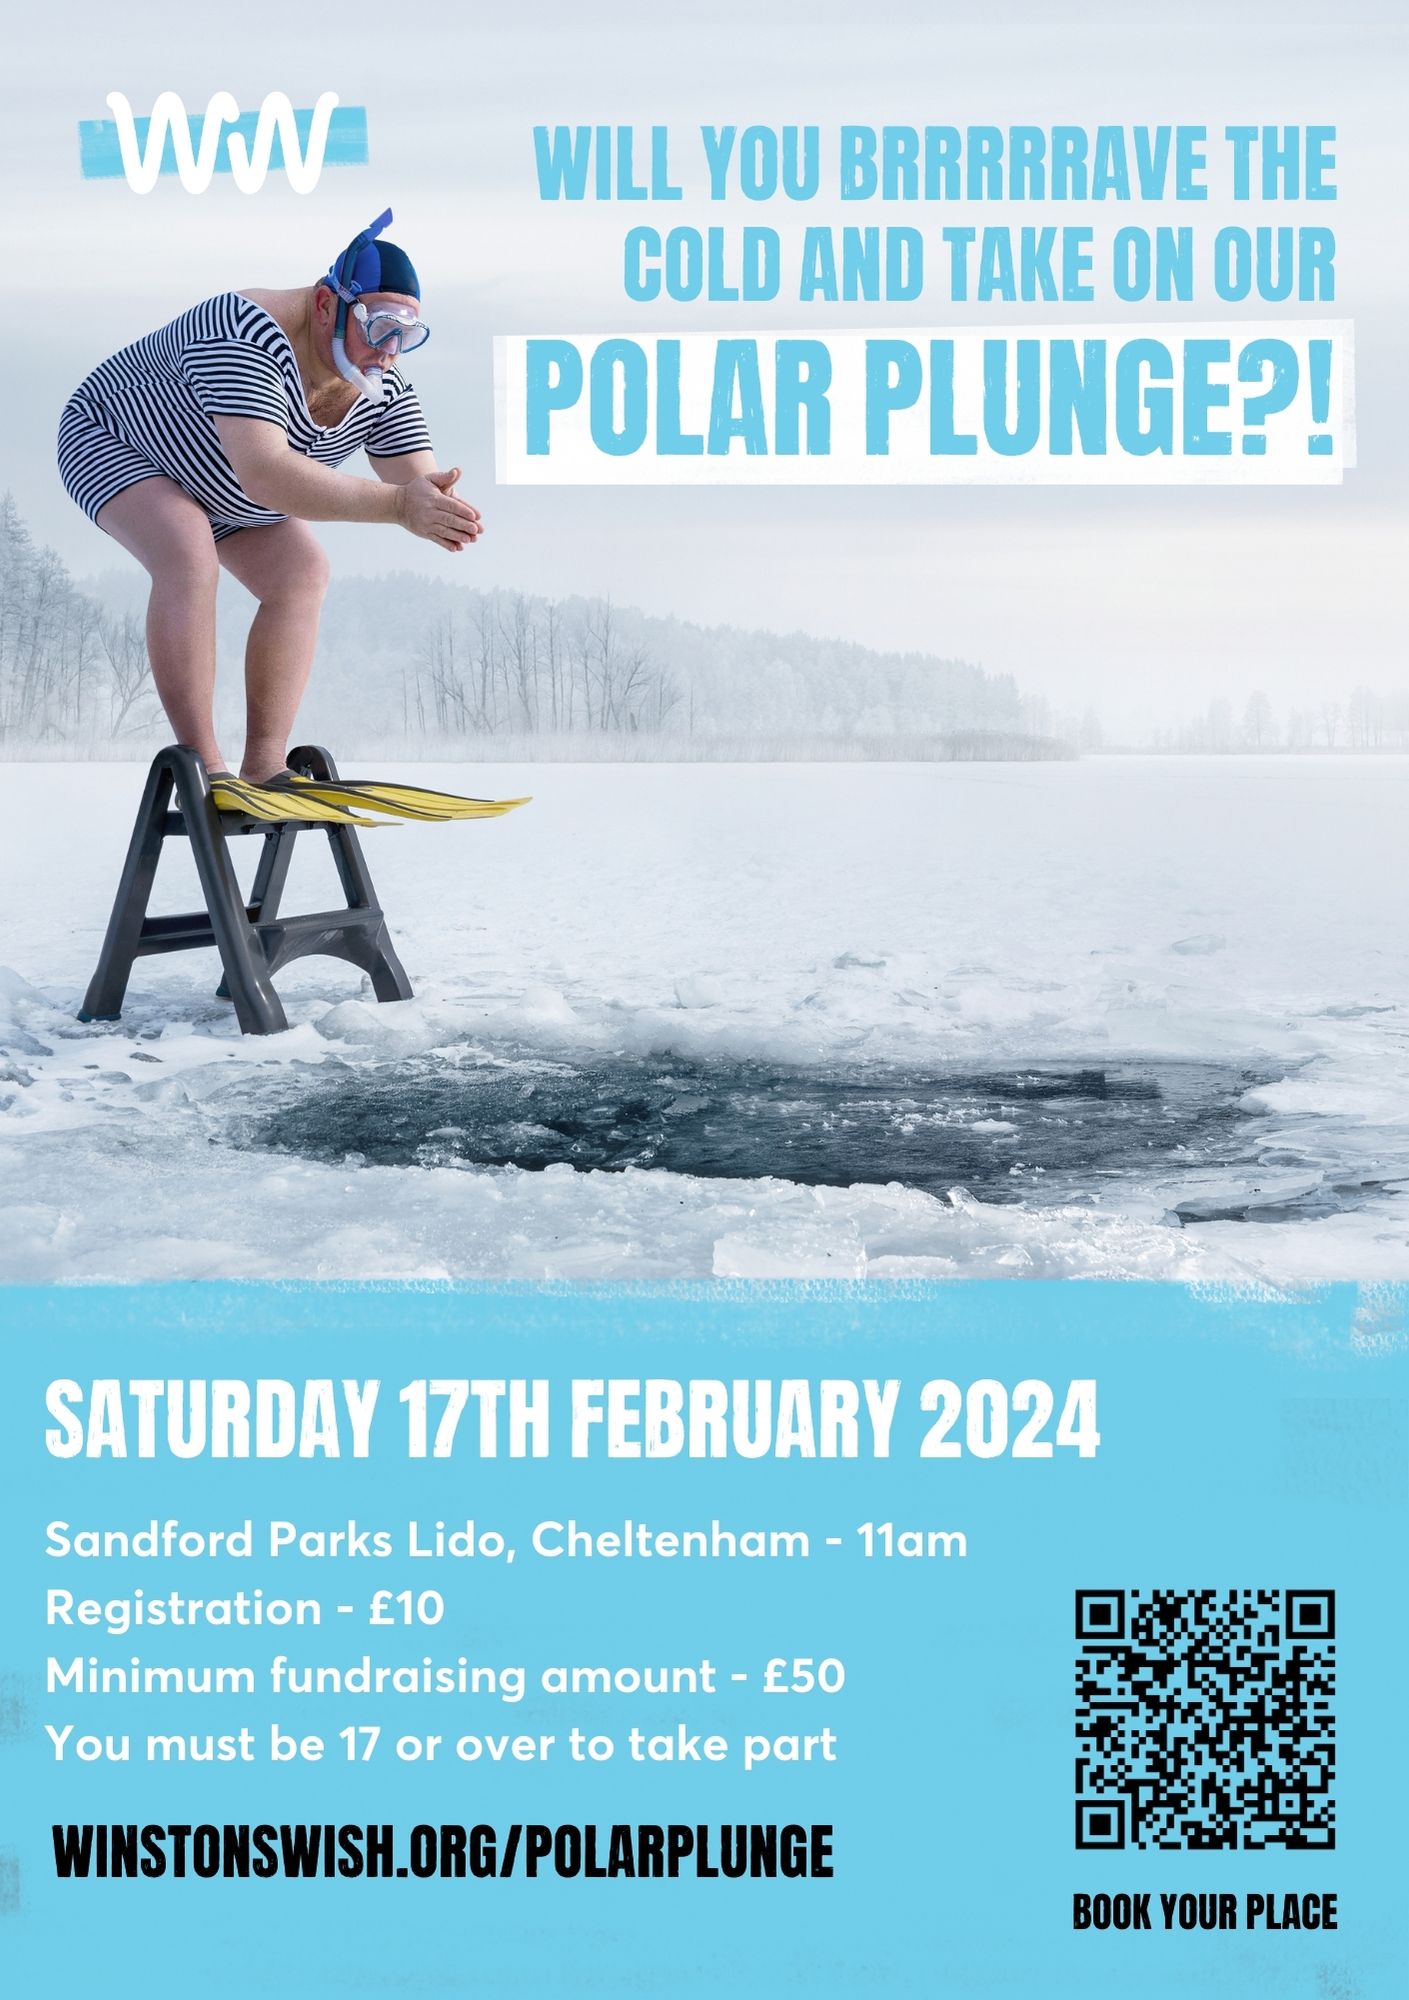 A flyer-type image designed to highlight the Winston's Wish Polar Plunge charity fundraiser event held on the 17th of February 2024 at Sandford Parks Lido Cheltenham.